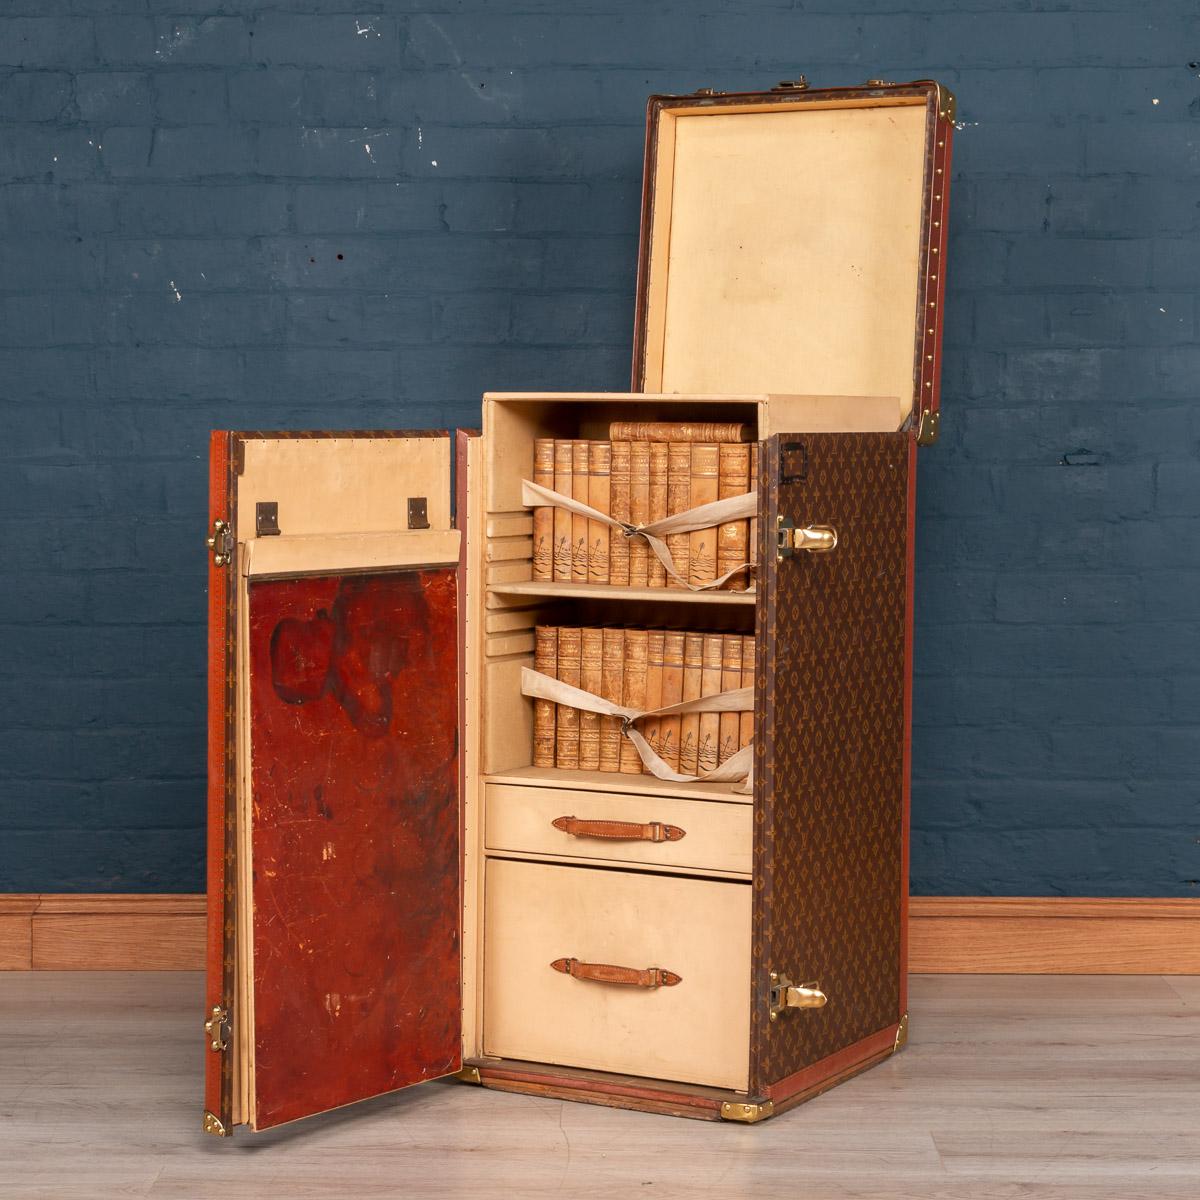 One of the rarest pieces Louis Vuitton ever made, the Leopold Stokowski desk trunk pictured on pages 296-99 in the 